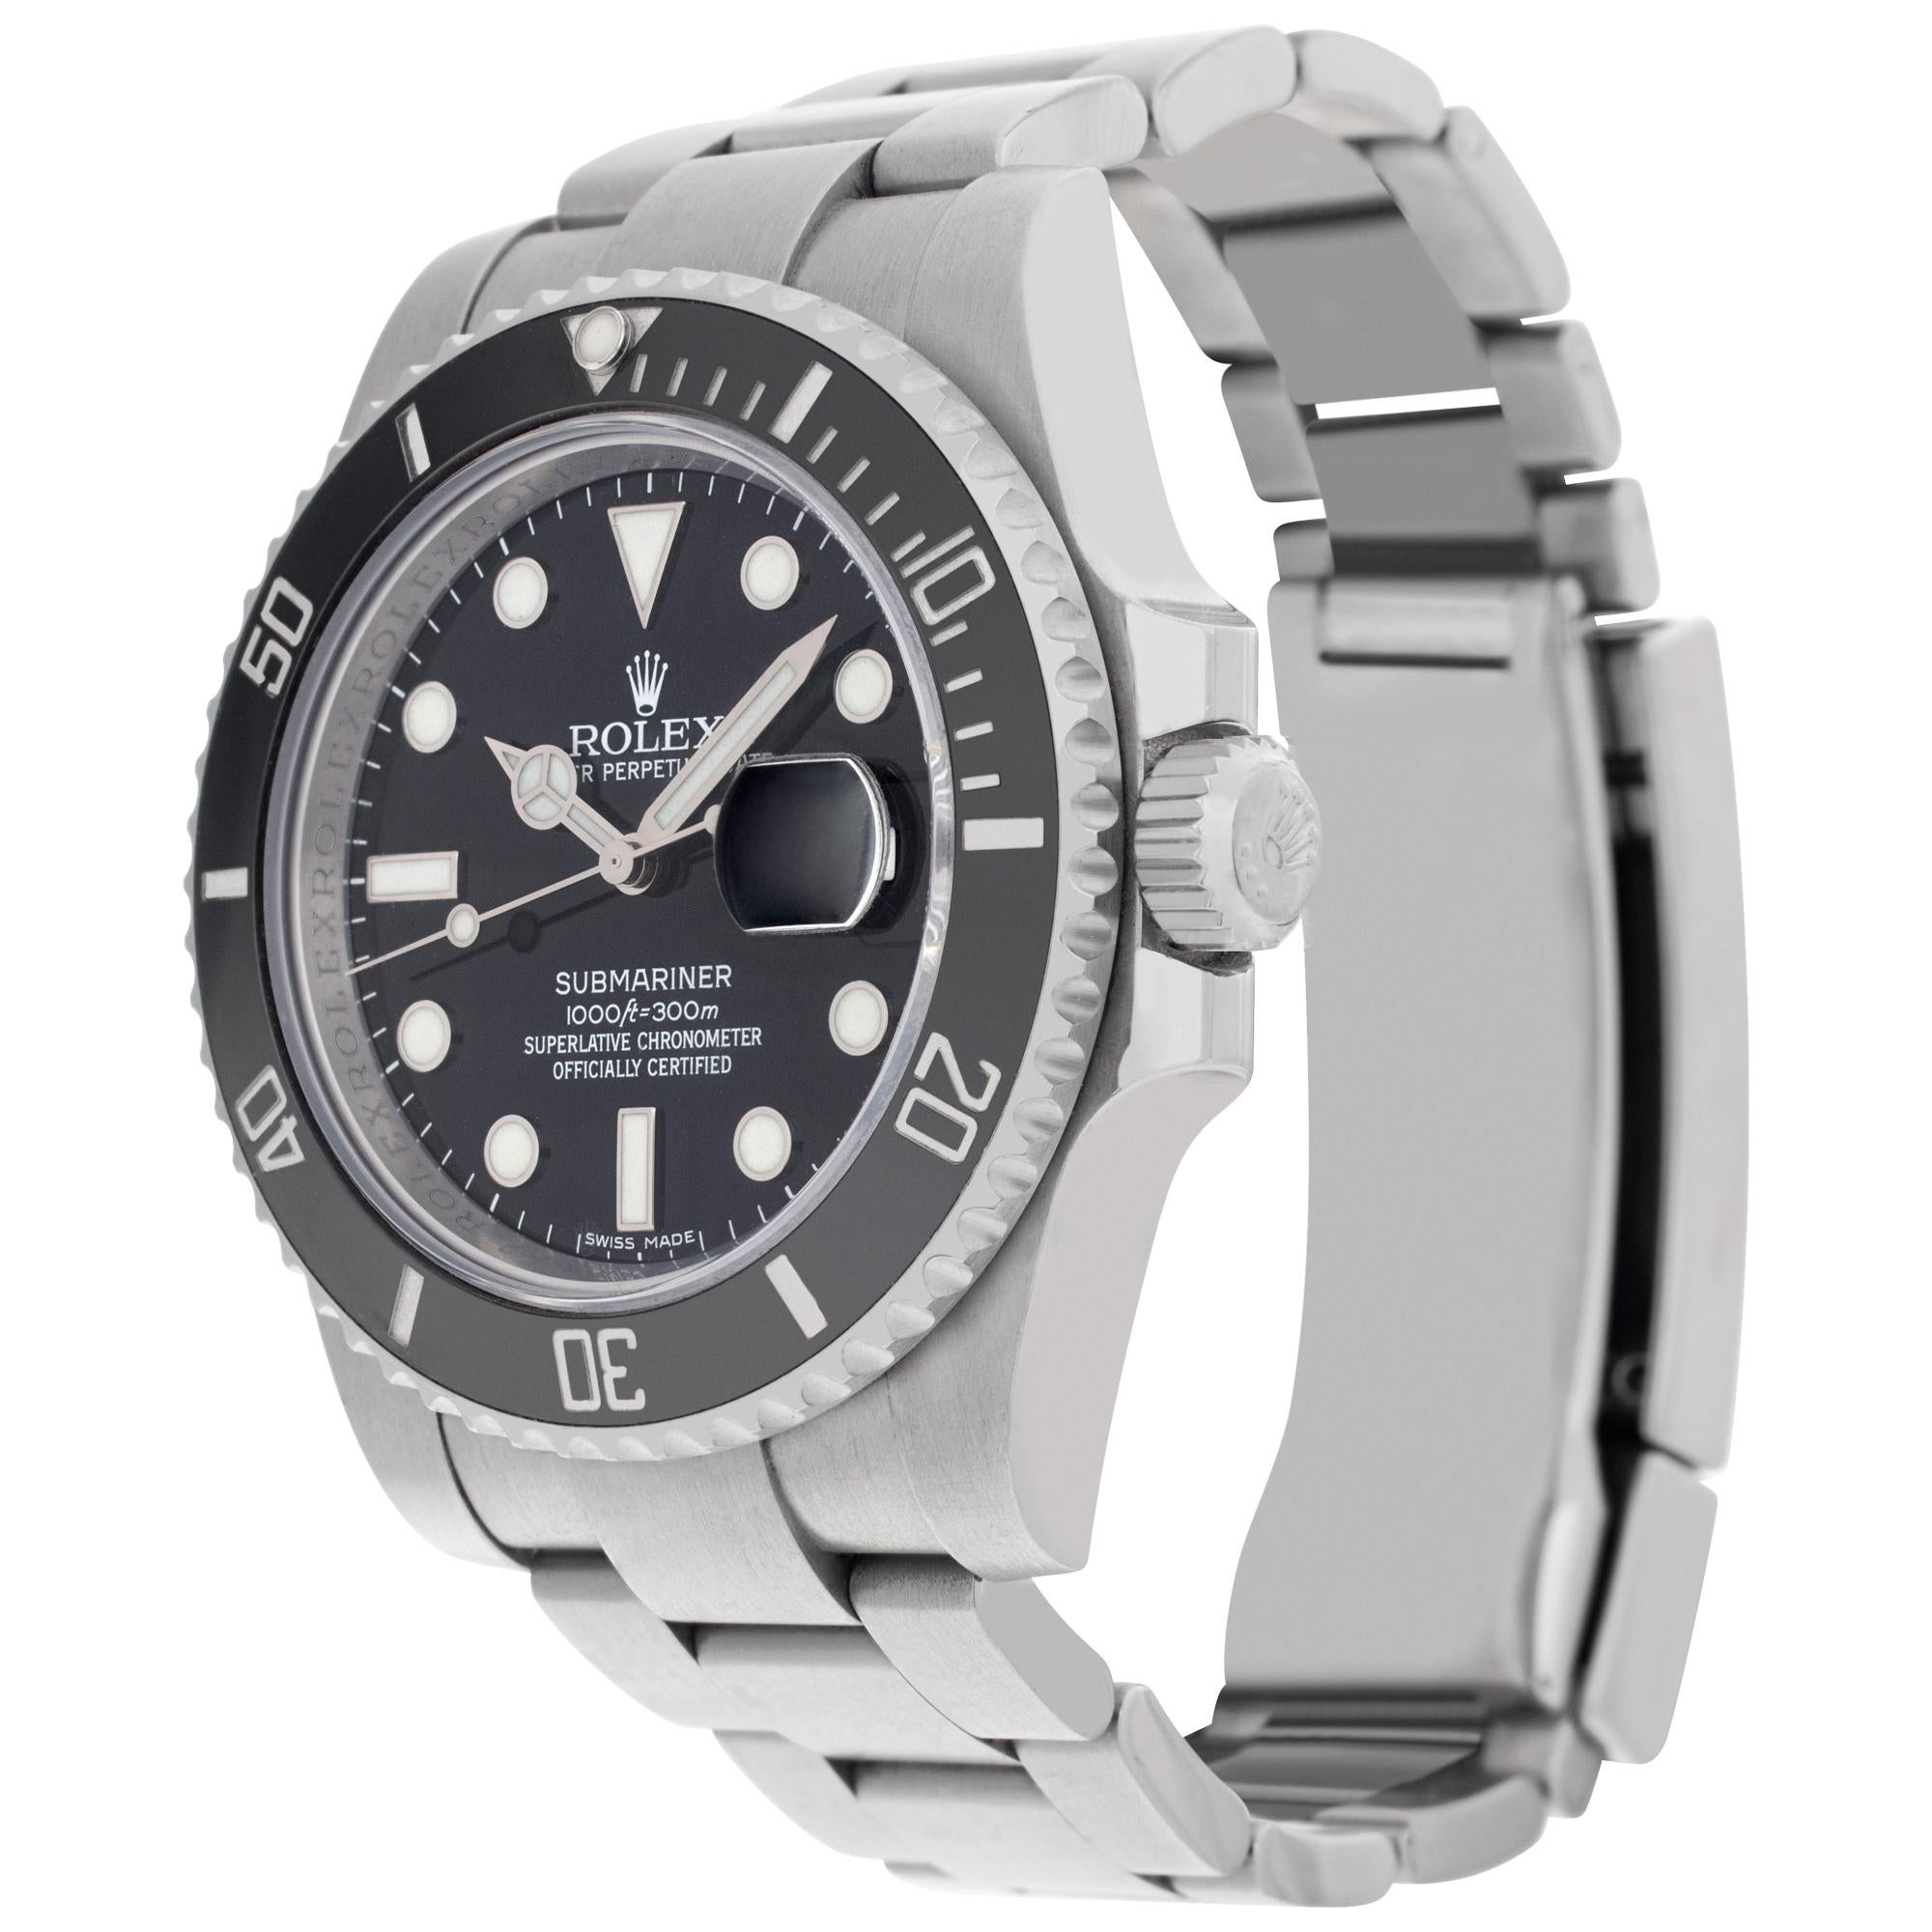 Rolex Submariner in stainless steel. Auto w/ sweep seconds and date. 40 mm case size. **Bank wire only at this price** Ref 116610ln. Circa 2010s. Fine Pre-owned Rolex Watch.

Certified preowned Sport Rolex Submariner 116610ln watch is made out of